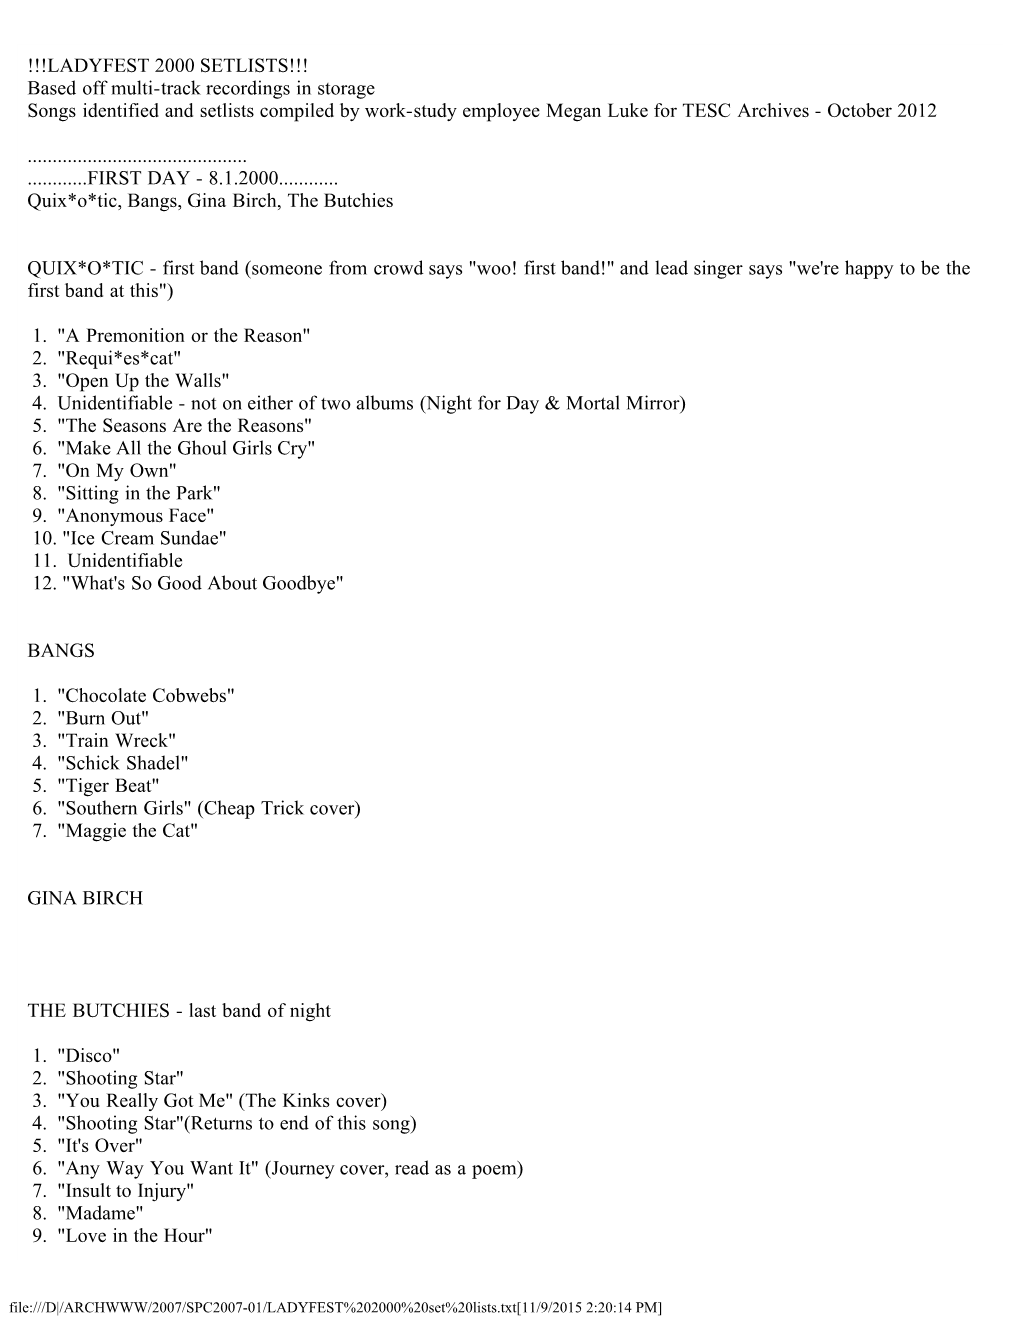 !!!LADYFEST 2000 SETLISTS!!! Based Off Multi-Track Recordings in Storage